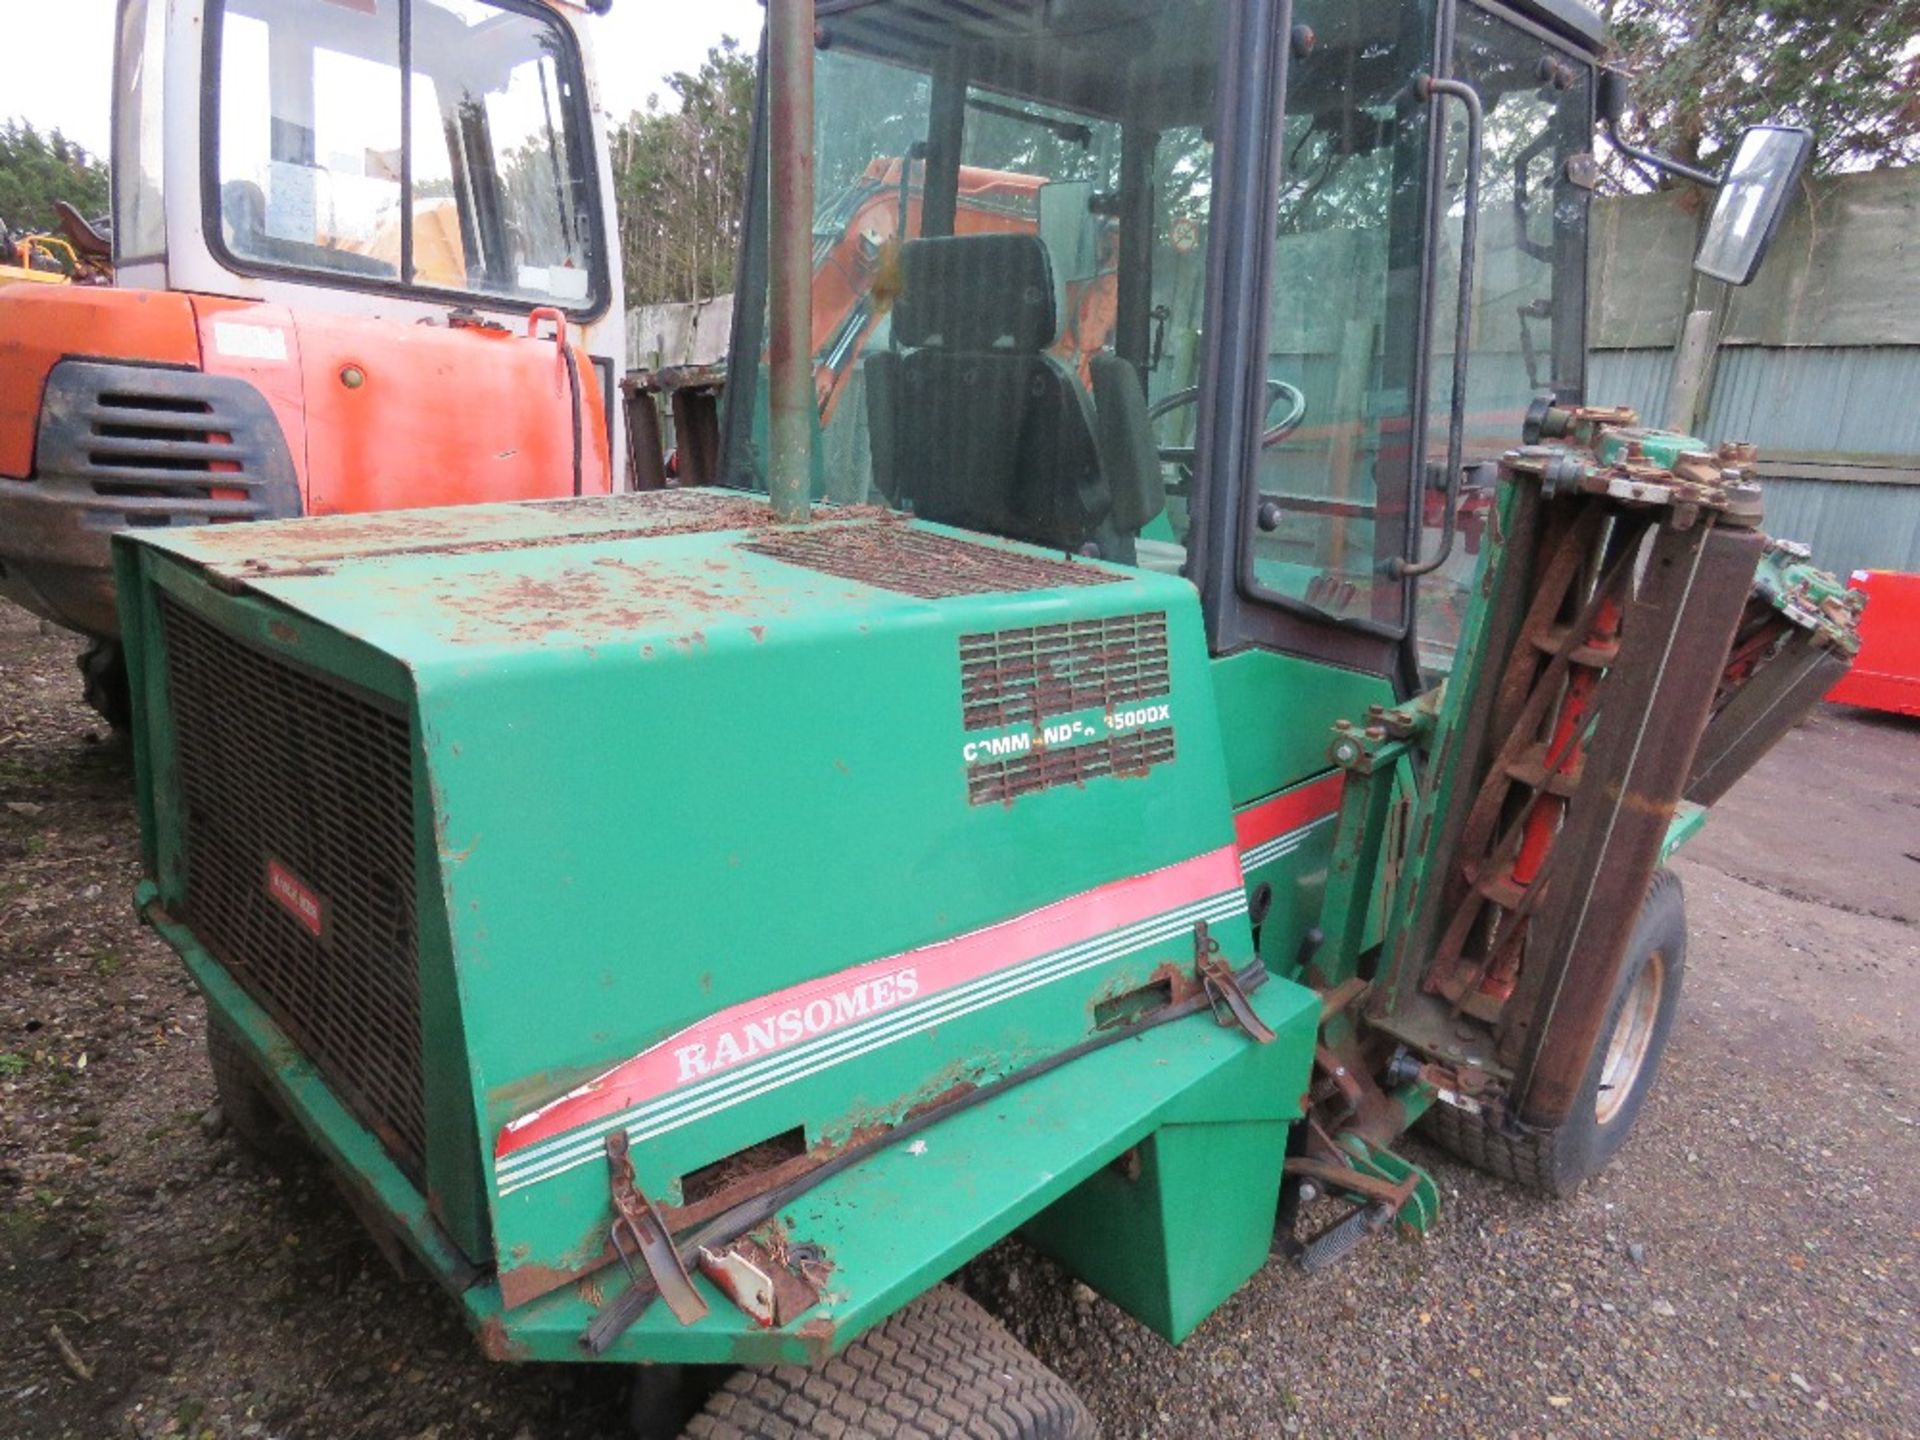 RANSOMES COMMANDER 3500DX 5 GANG MOWER, 4WD, 3138 REC HOURS. KUBOTA ENGINE. WHEN TESTED WAS SEEN TO - Image 4 of 10